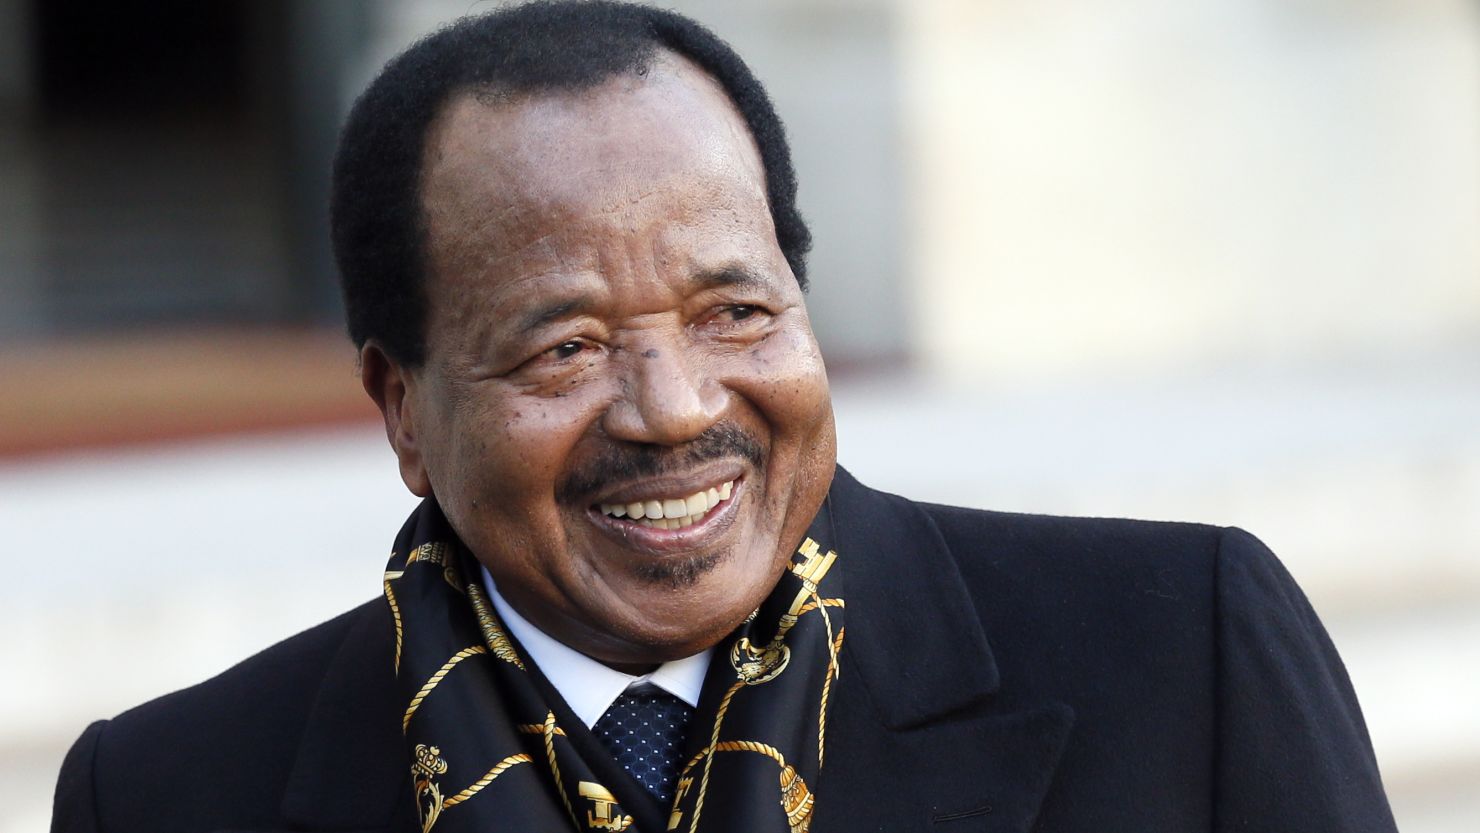 Cameroon's President Paul Biya has ordered the closure of nearly 100 Christian churches in key cities.